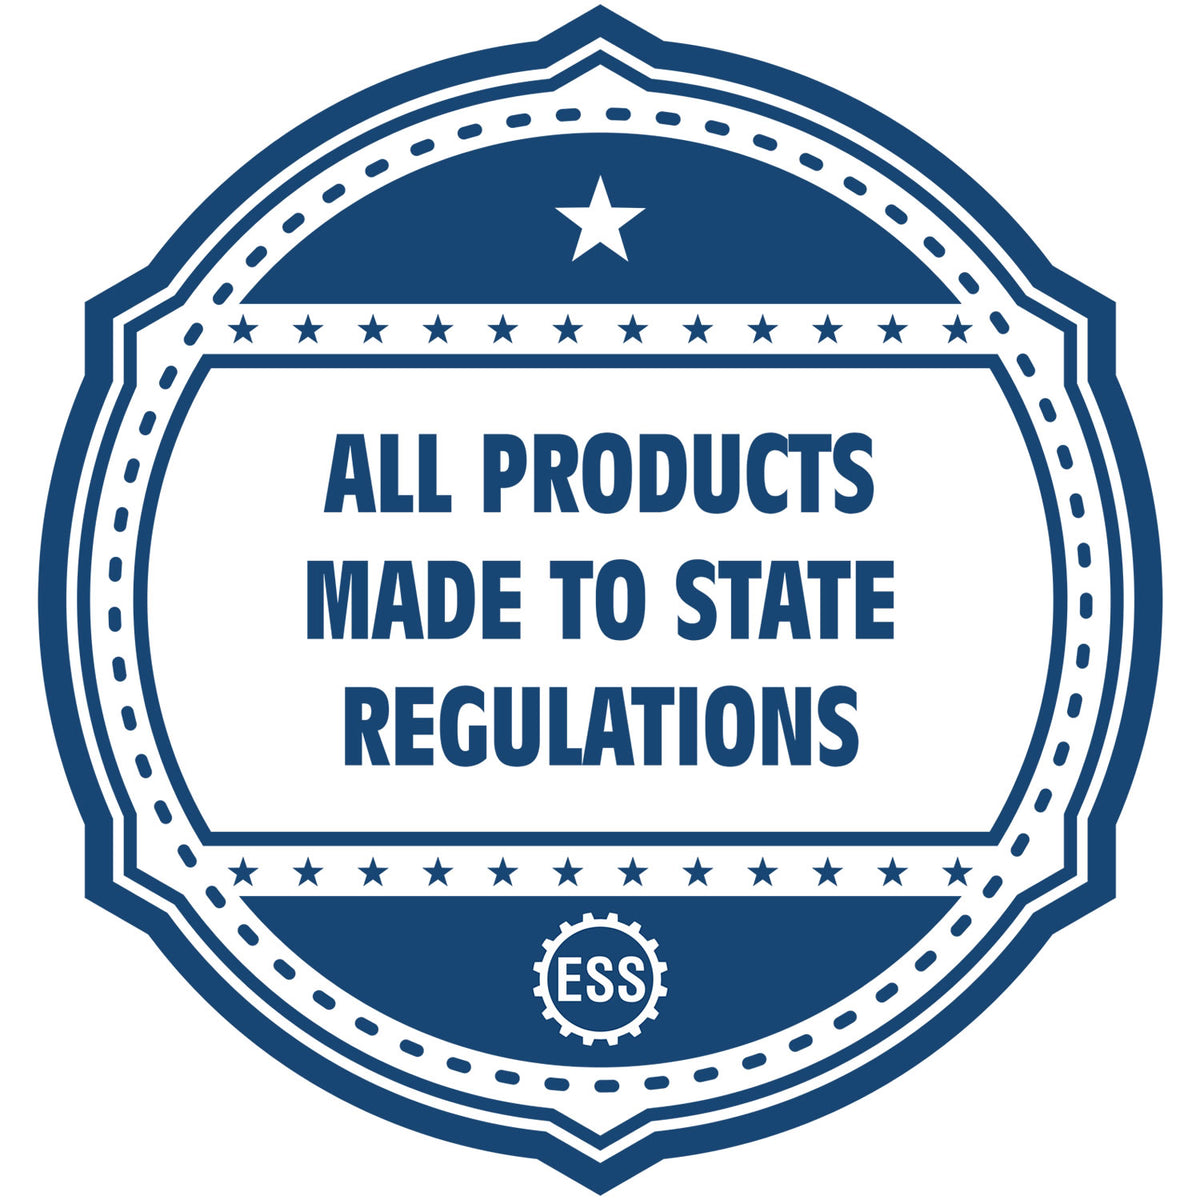 An icon or badge element for the Louisiana Desk Architect Embossing Seal showing that this product is made in compliance with state regulations.